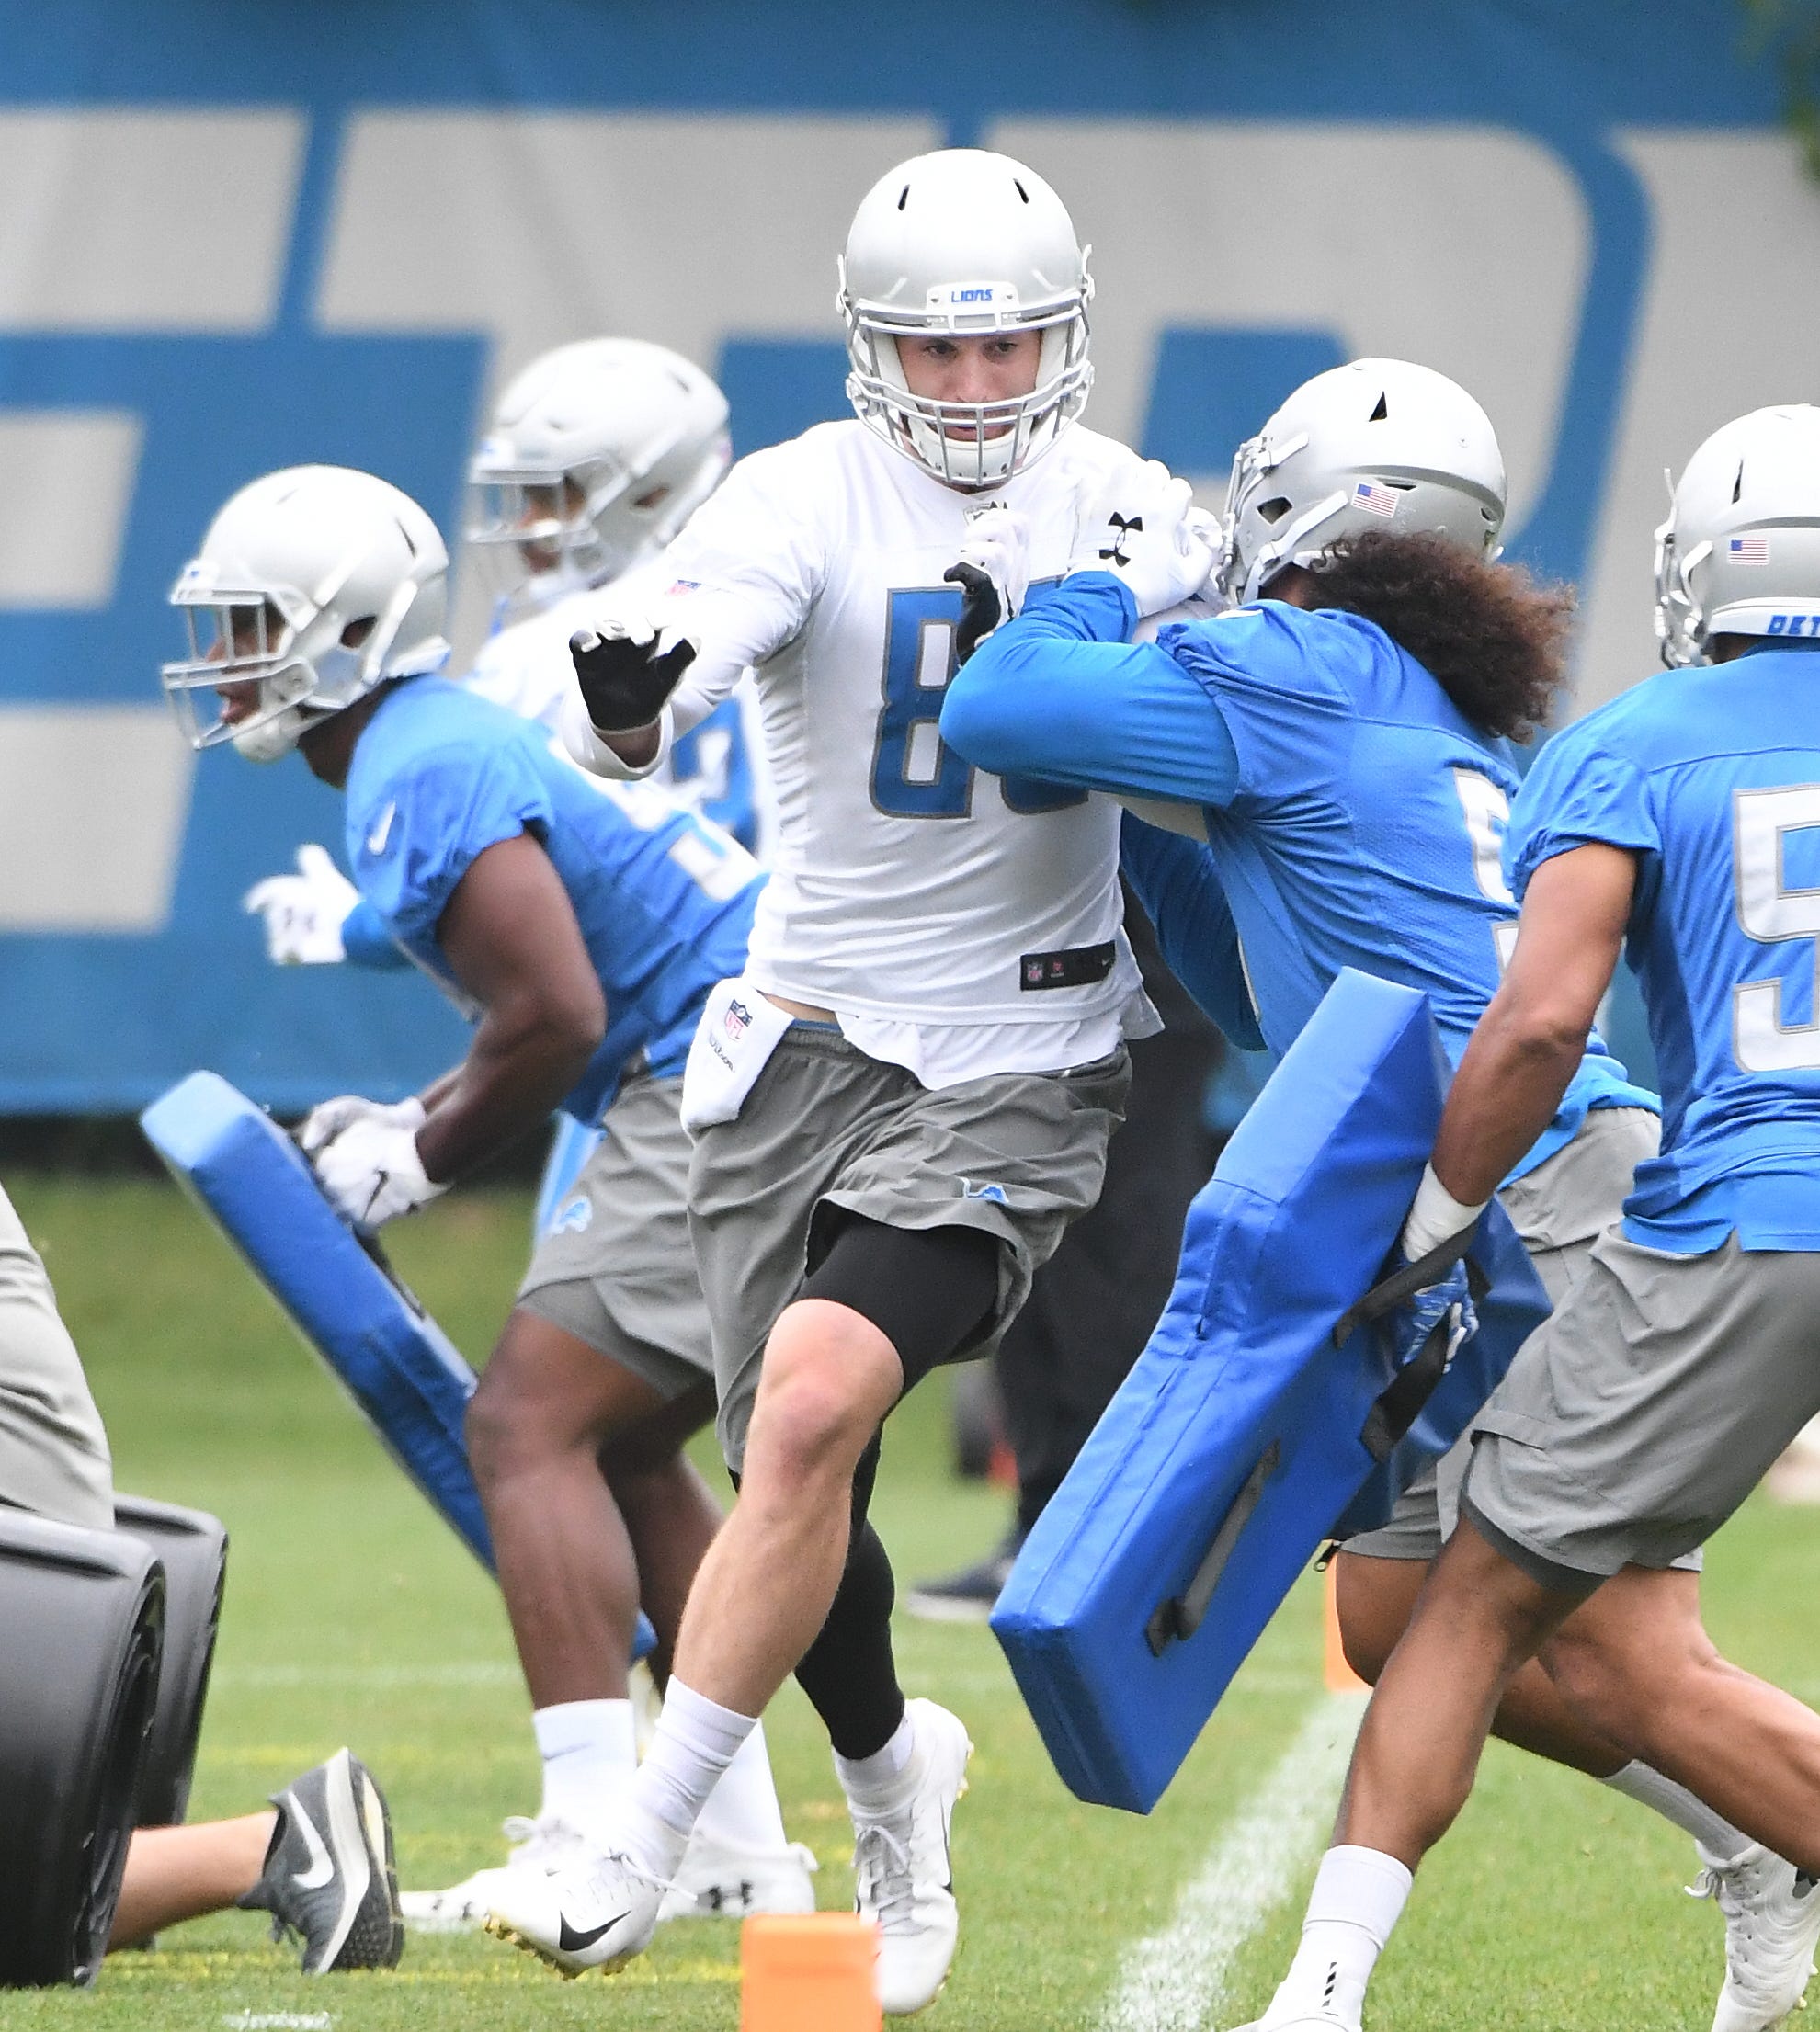 Lions tight end Jesse James works against the defense during drills.